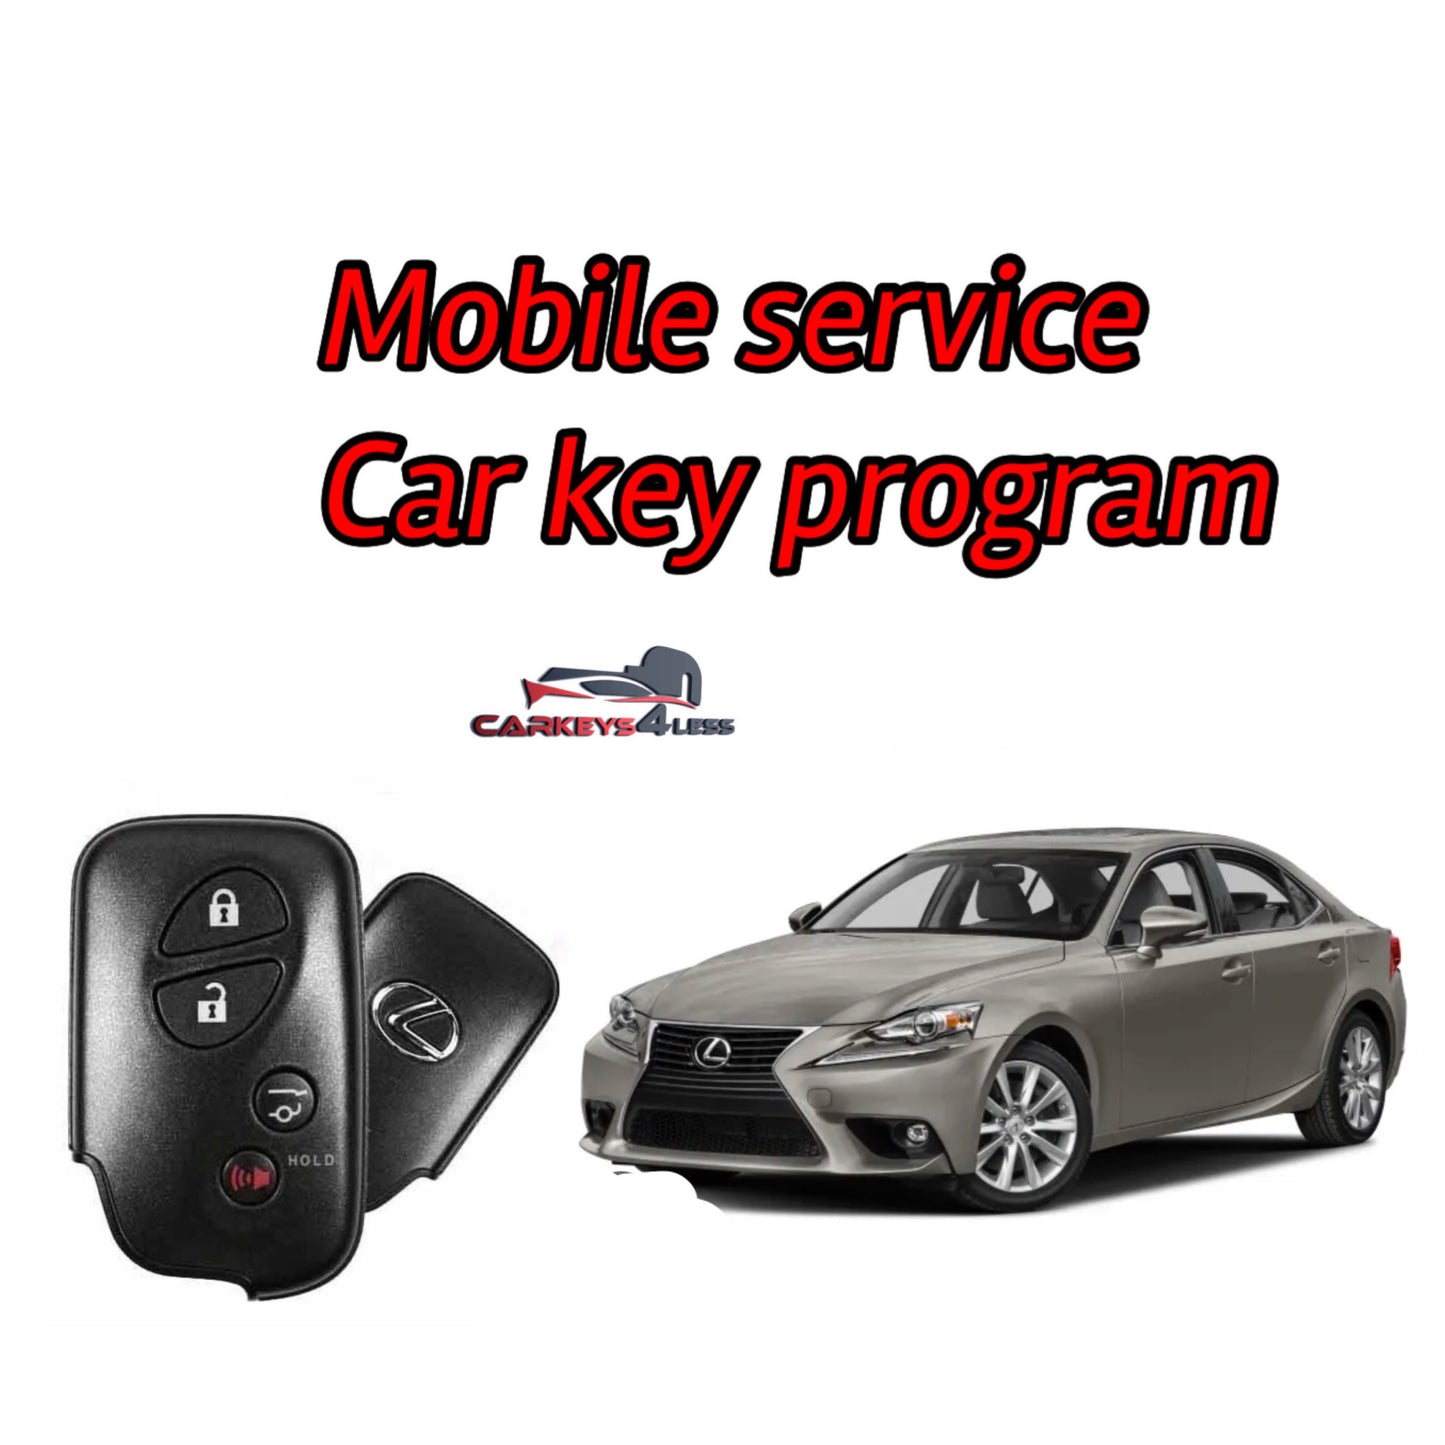 Mobile service for an oem refurbished lexus car key replacement